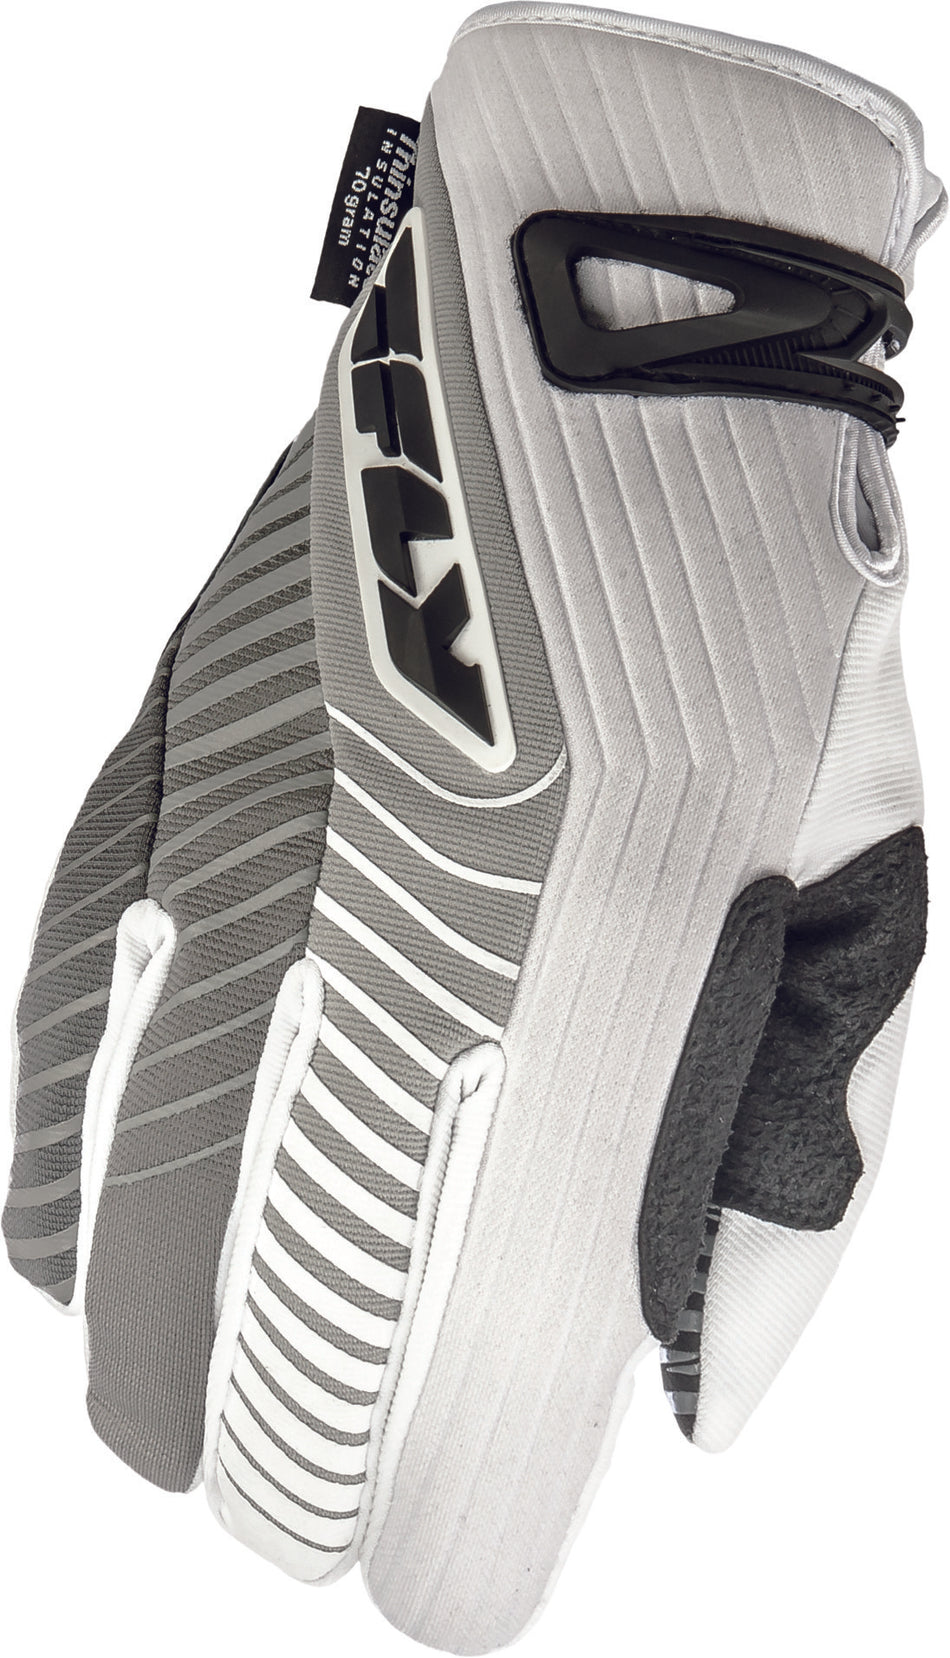 FLY RACING Title Gloves Long White Sz 12 #5884 367-034~12